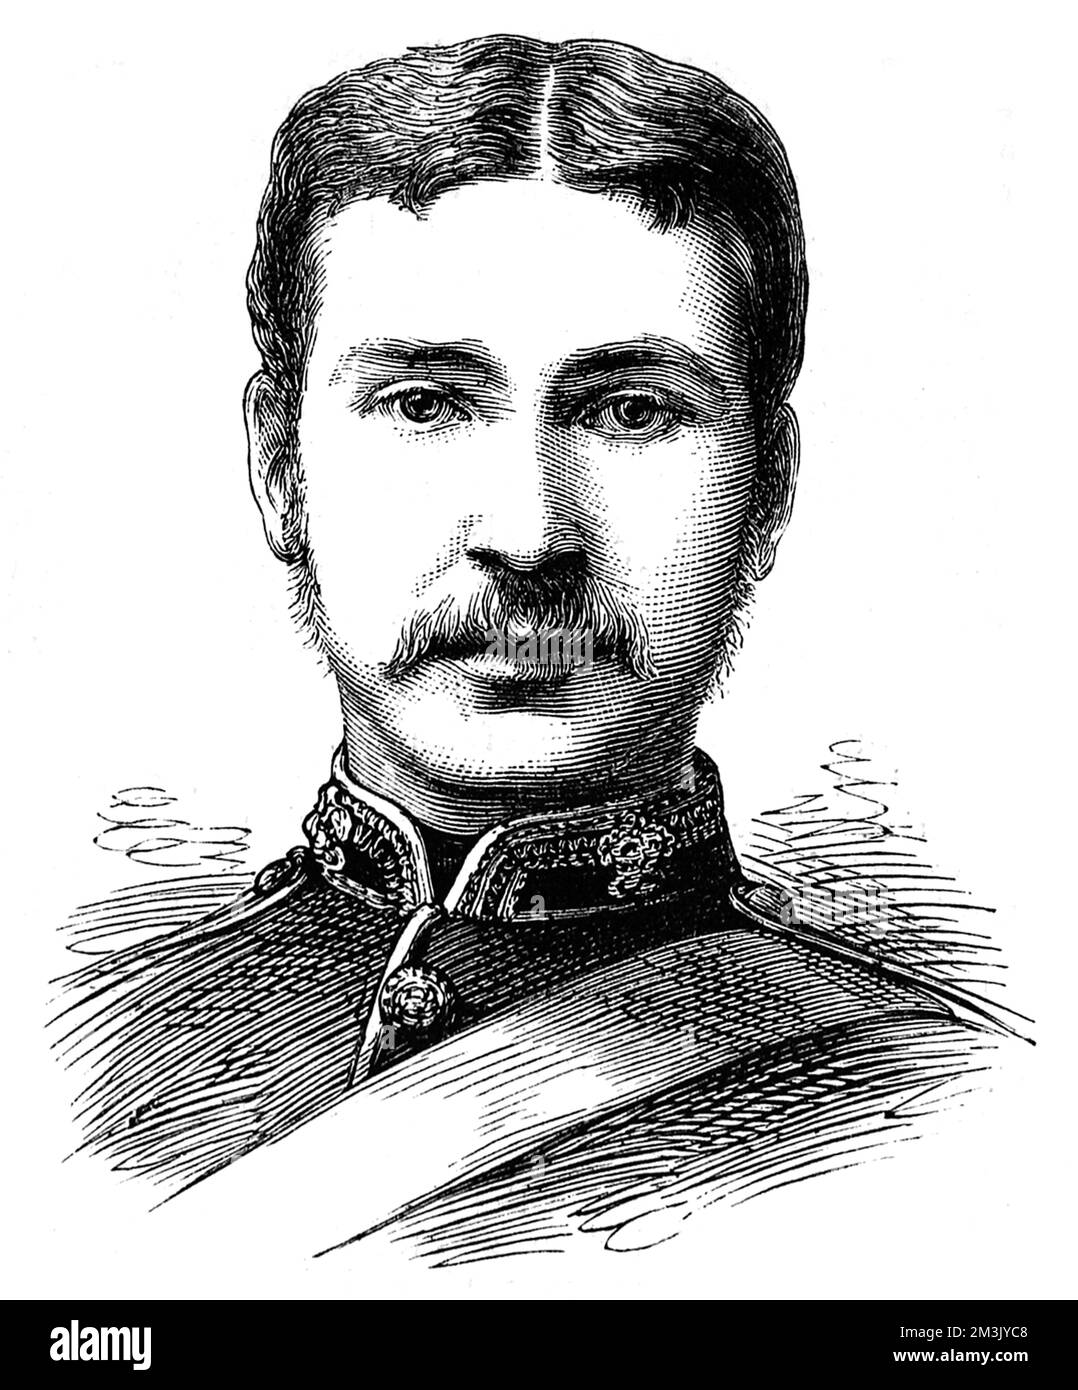 Portrait of Mr W A Dunne, Commissariat Department, defender of Rorke's Drift. 137 British soldiers held the fort at Rorke's Drift against a force of over 3,000 Zulus. 11 men were awarded Victoria Crosses for bravery in evacuating the hospital there.  Dunne helped build a fortification where the men held out against the Zulus.     Date: 1879 Stock Photo